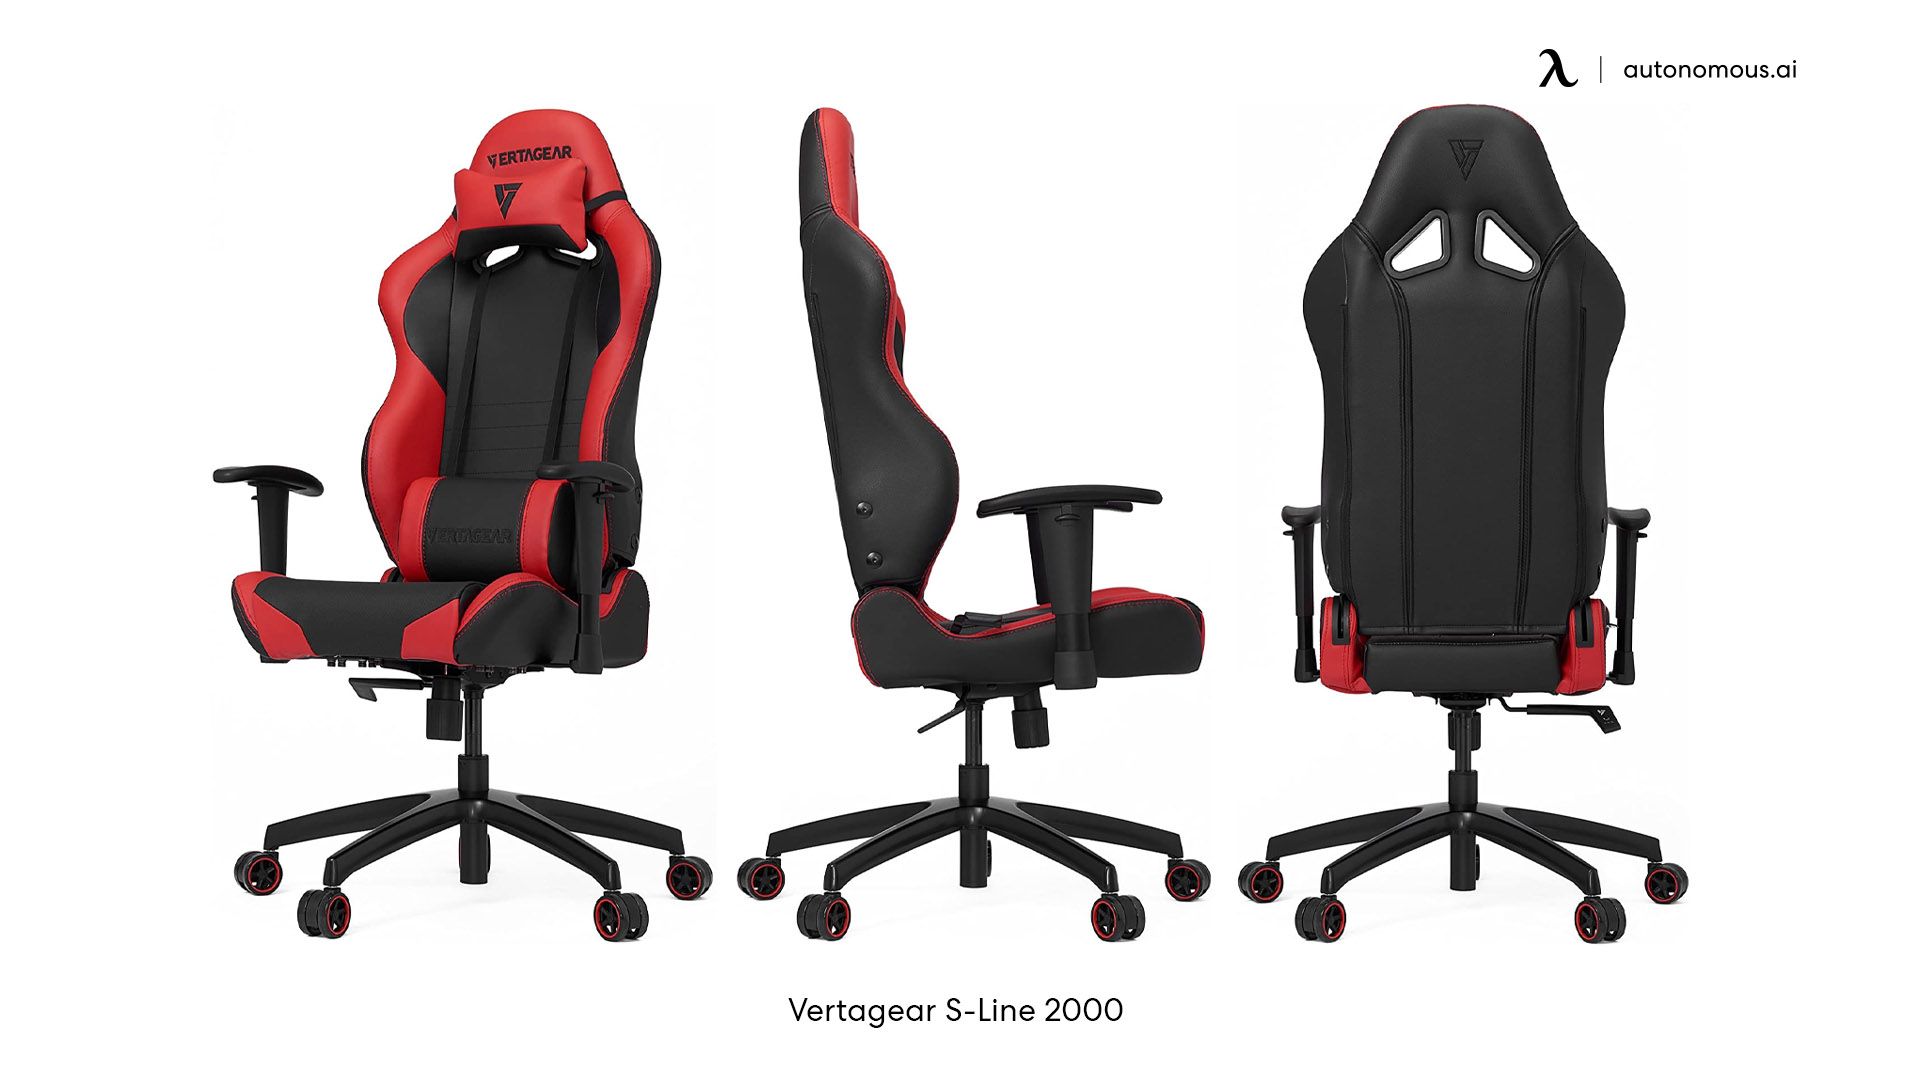 Vertagear S-Line 2000 Gaming Chair